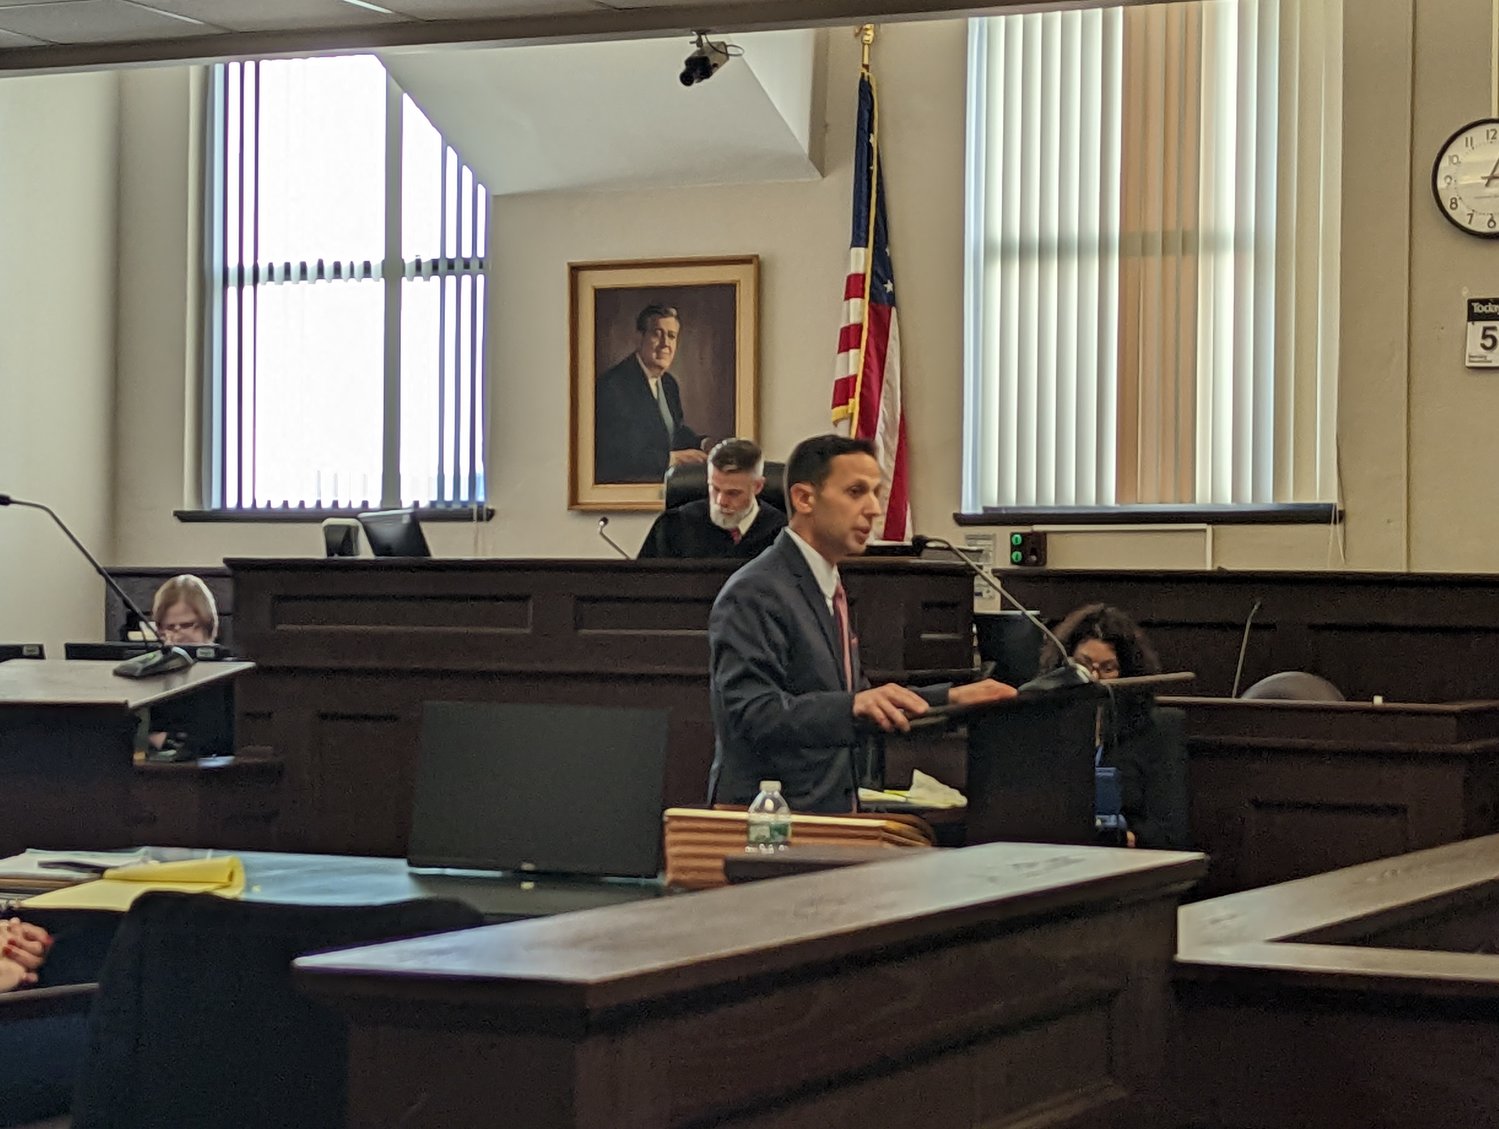 Assistant District Attorney Todd Carville, the prosecutor, laid out his case to the jury in his opening statement Monday afternoon. Carville said this was a "crime of anger, a crime of rage," and that there was no justification for brother killing brother.